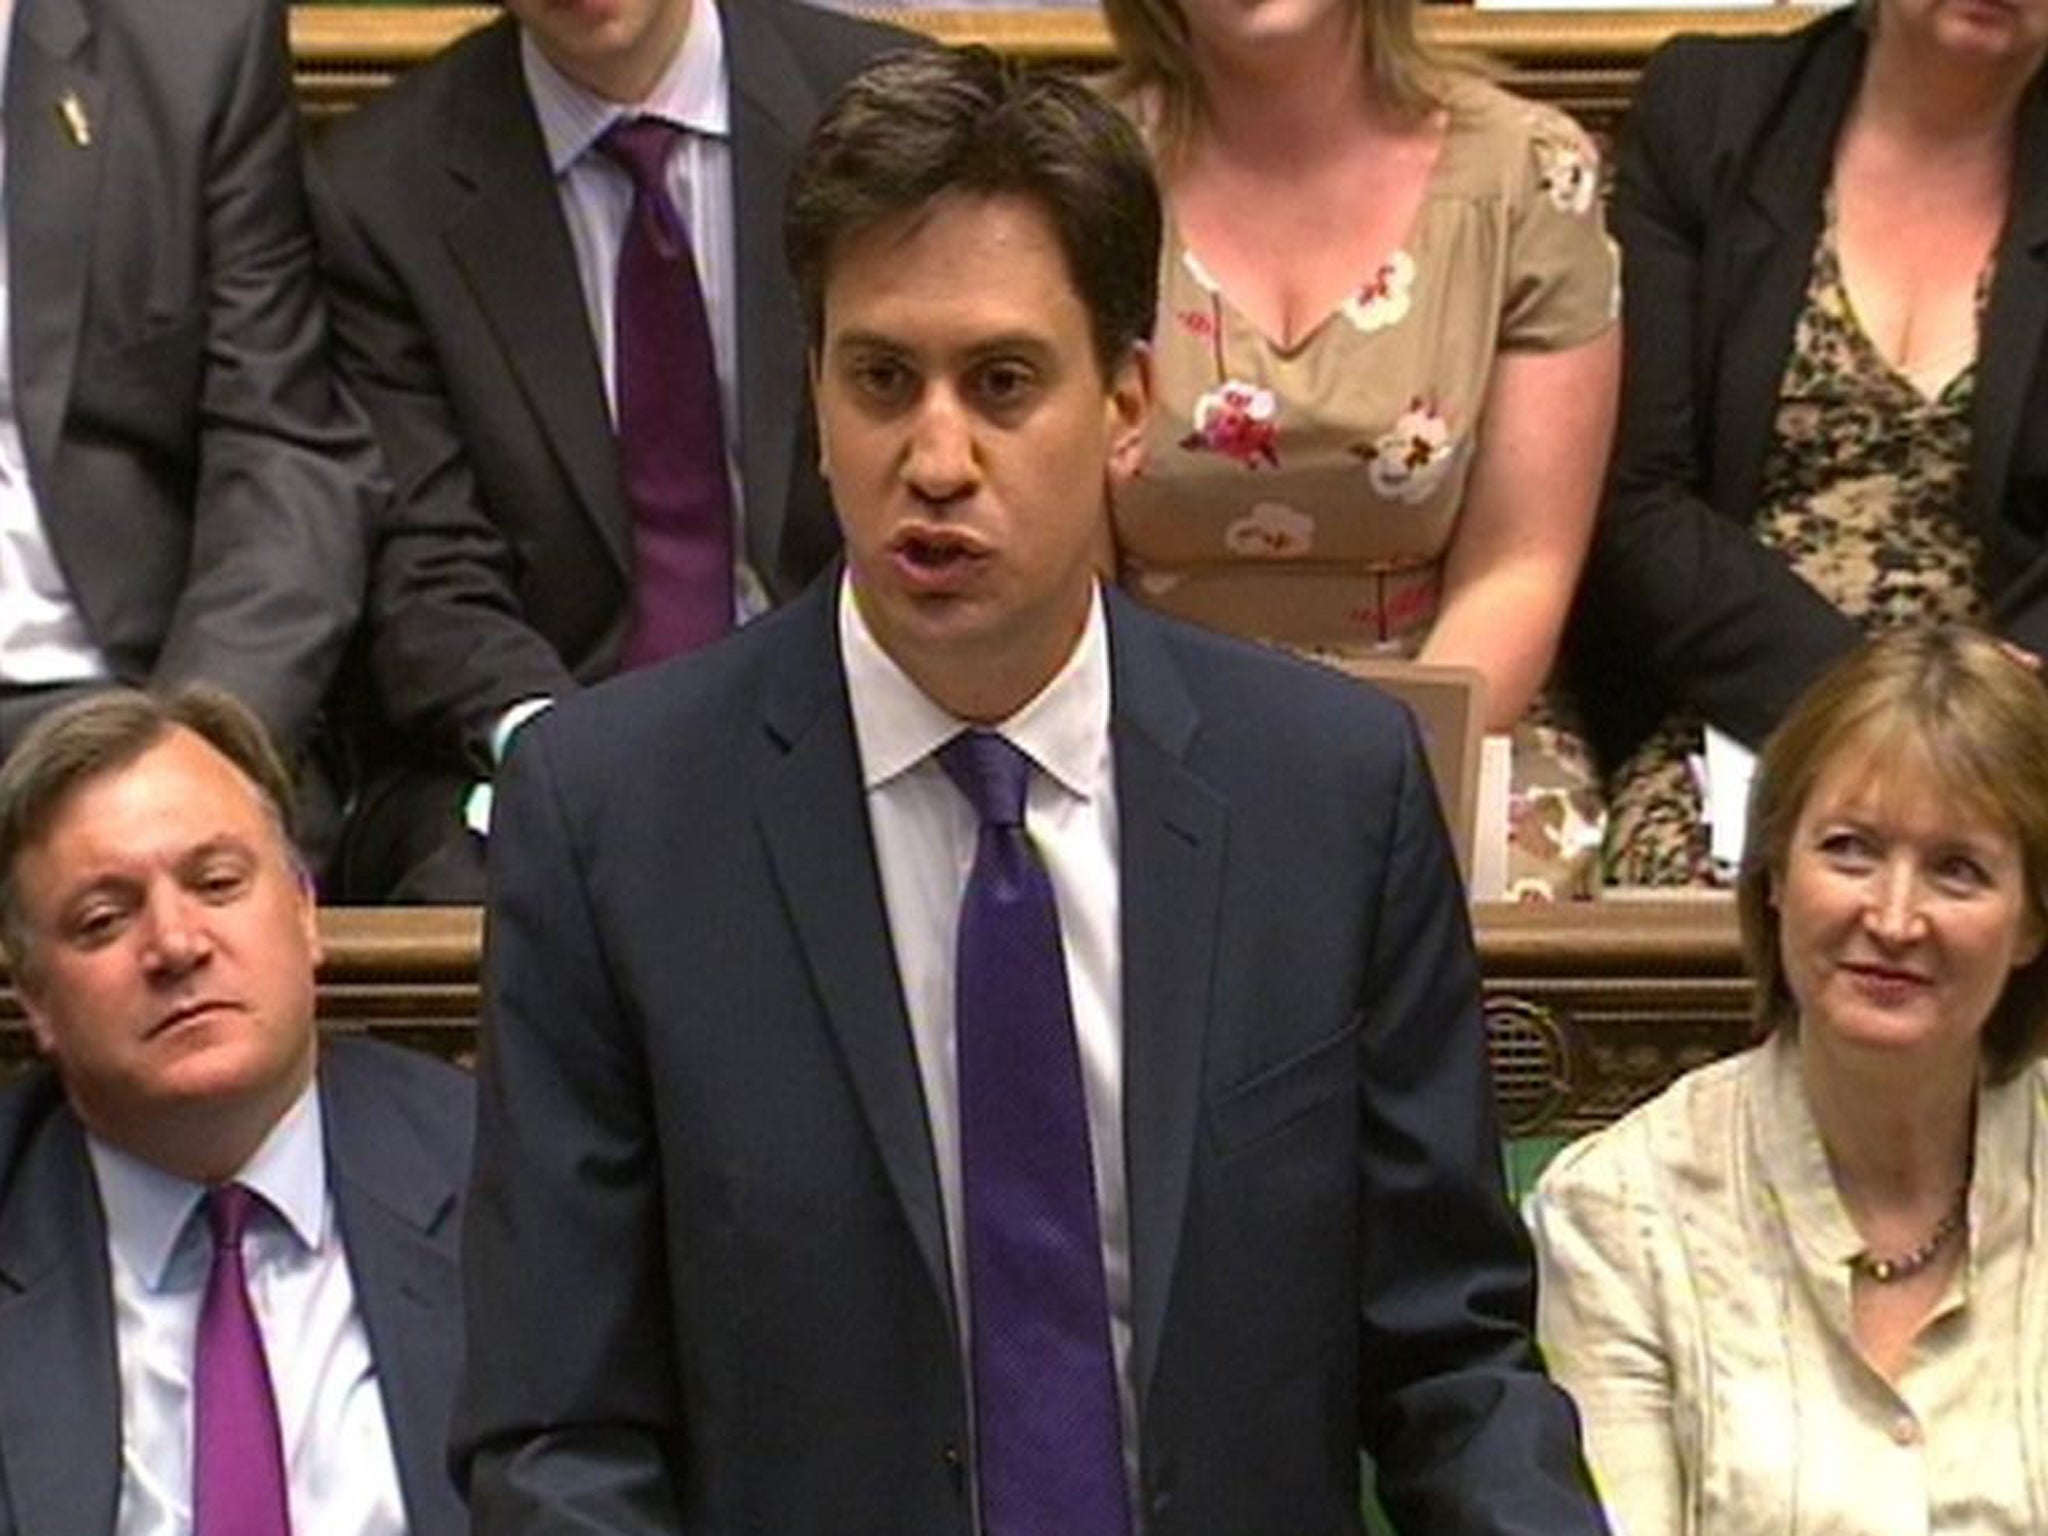 Labour party leader Ed Miliband speaks during Prime Minister's Questions in the House of Commons